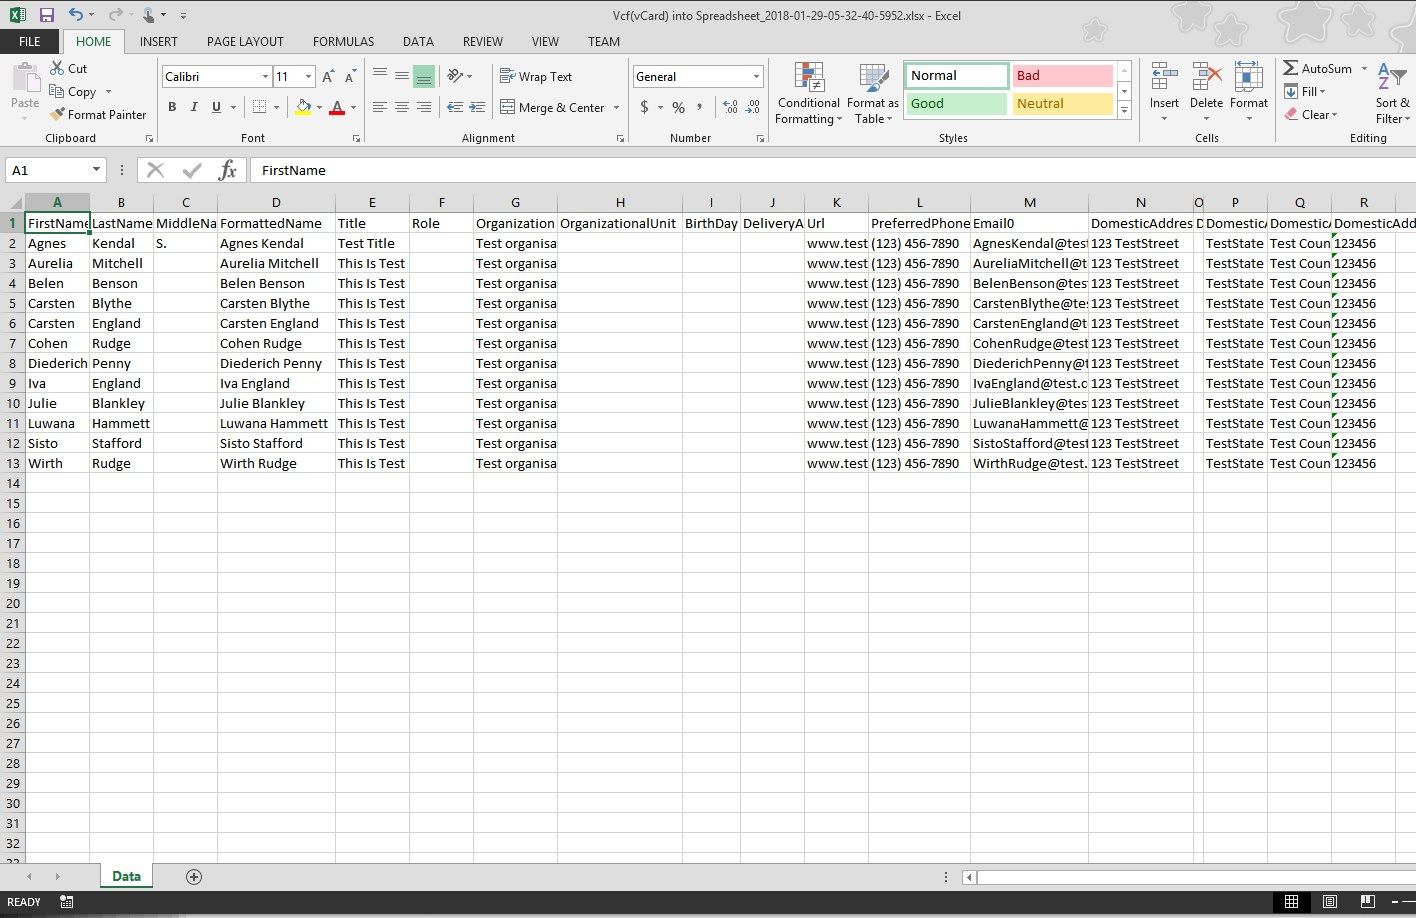 this is how sample of excel file created from vcf looks like